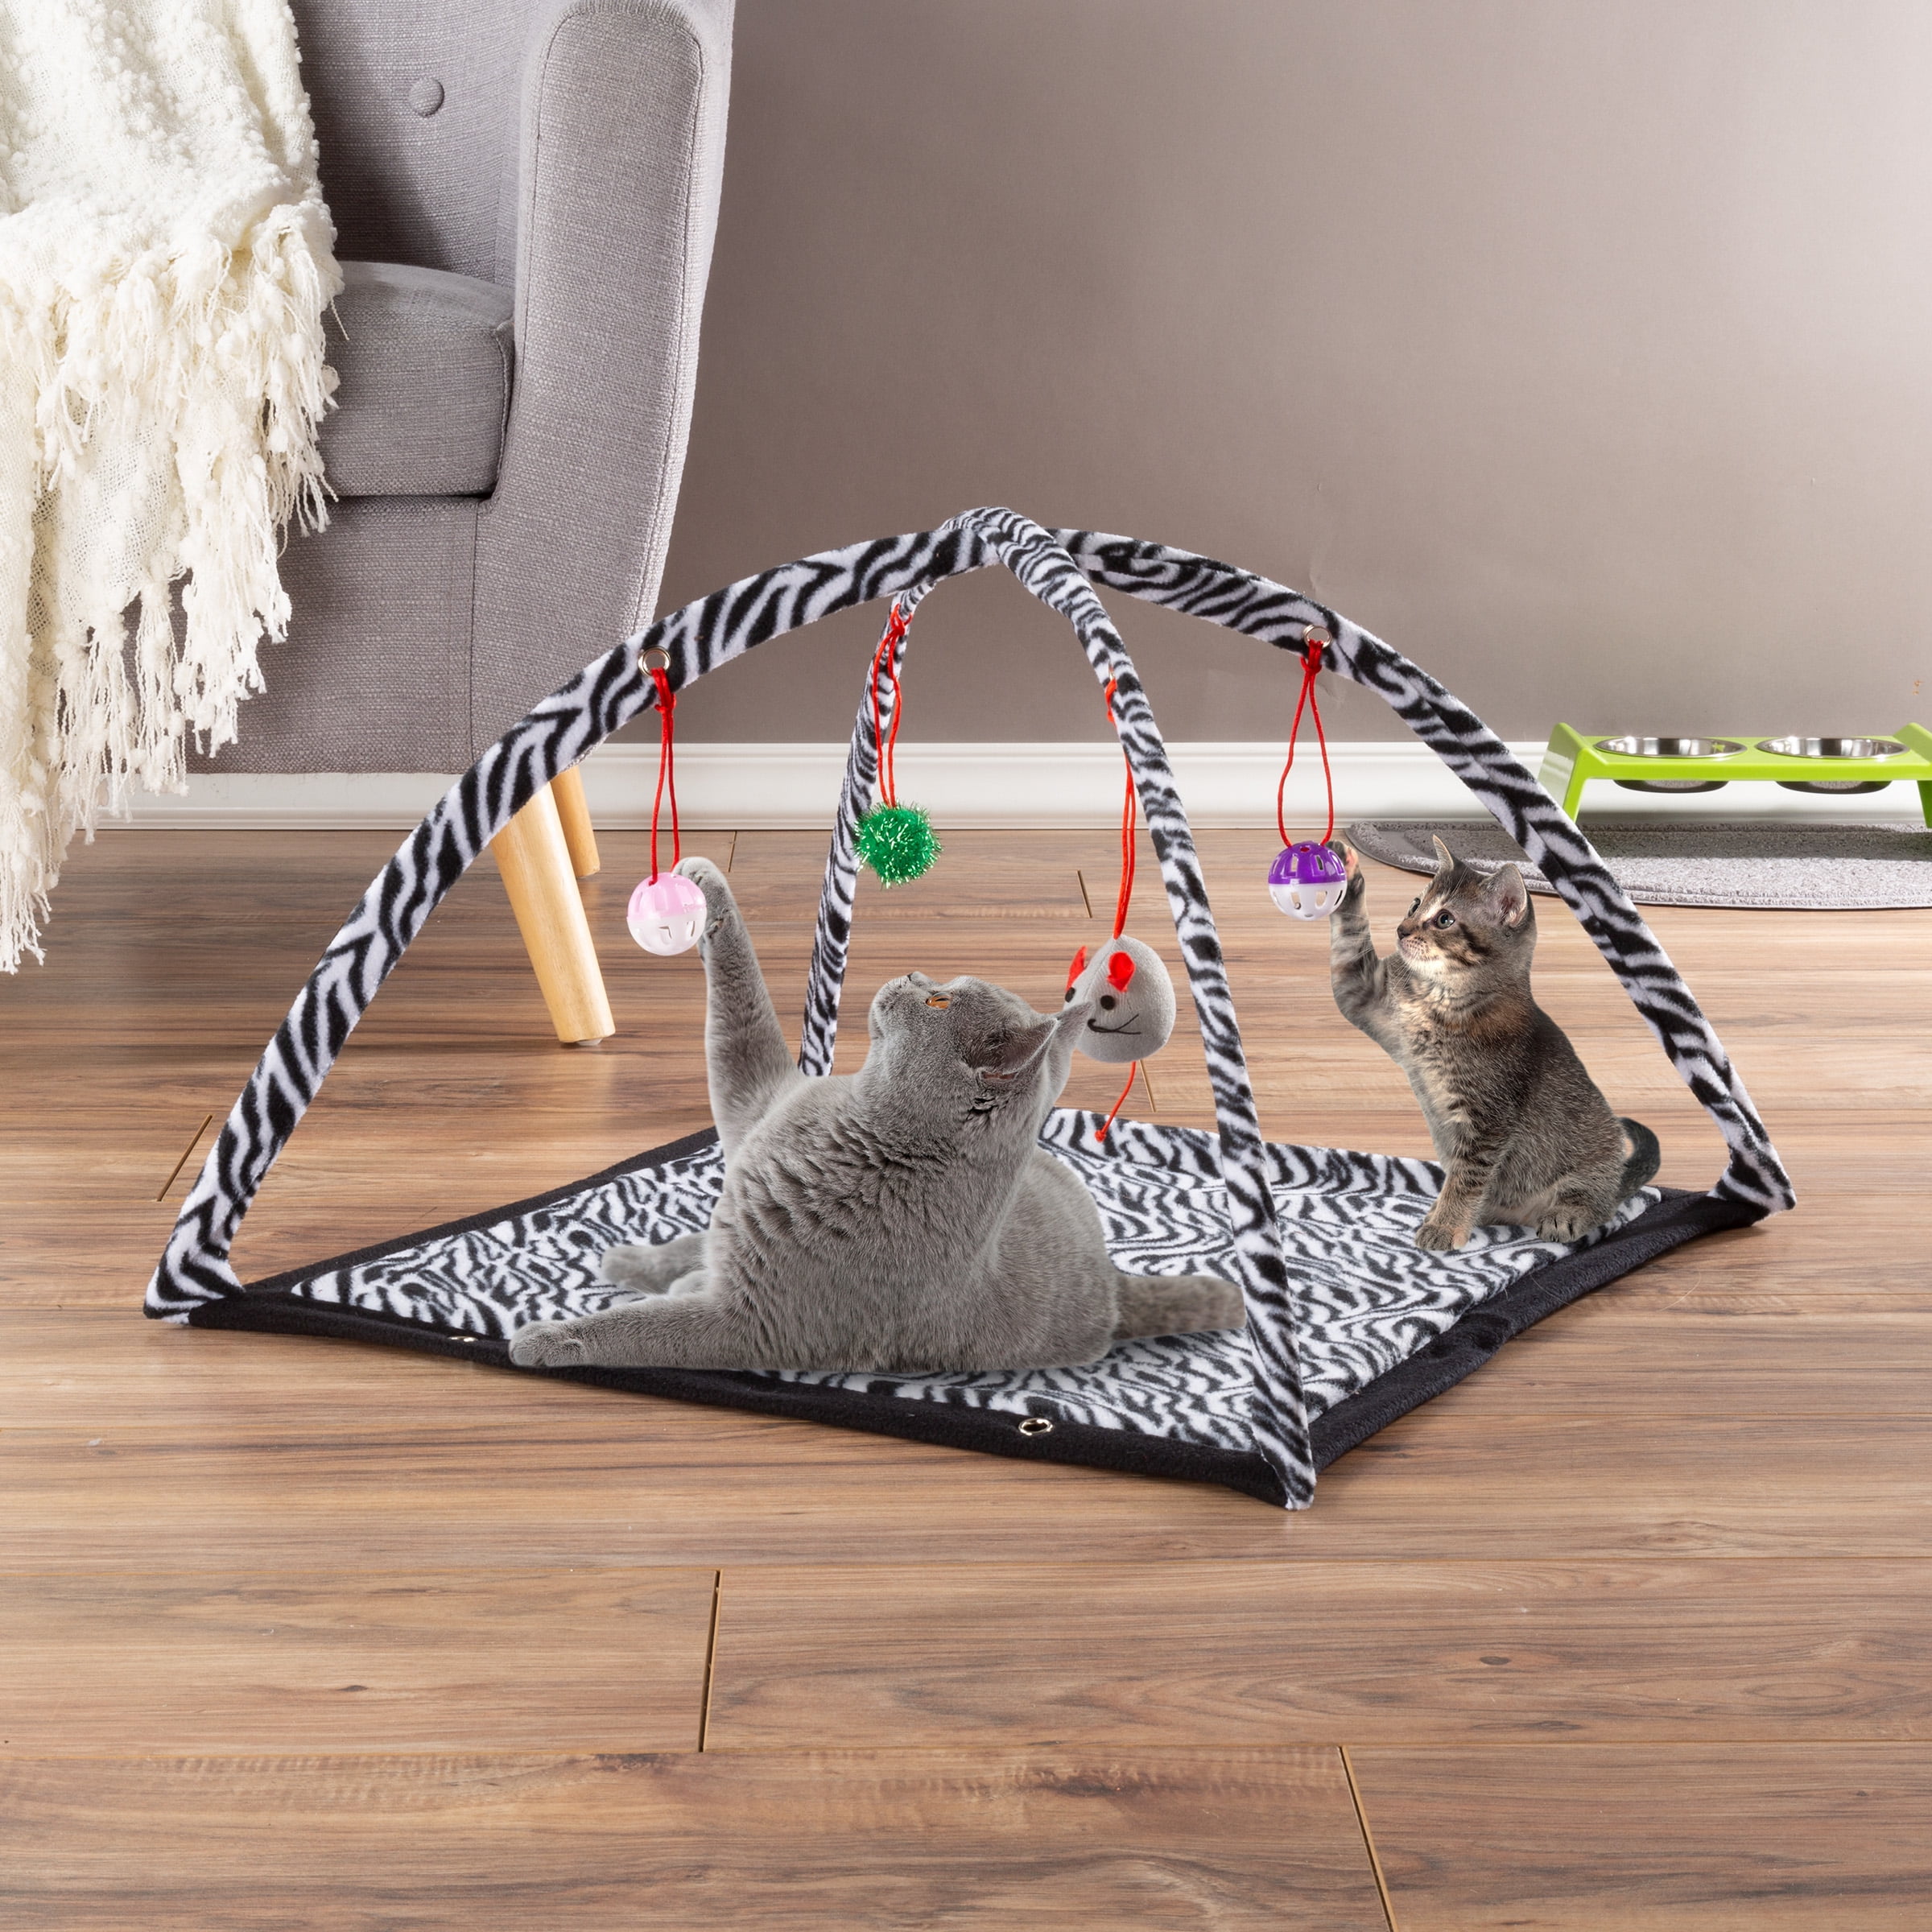 GETFIT Portable Pet Cat Activity Play Mat Twist & Fold Activity Gym & Play  Mat,Cat Toys Activity Tent Exercise Play Soft Bed Mat With Hanging Toy 